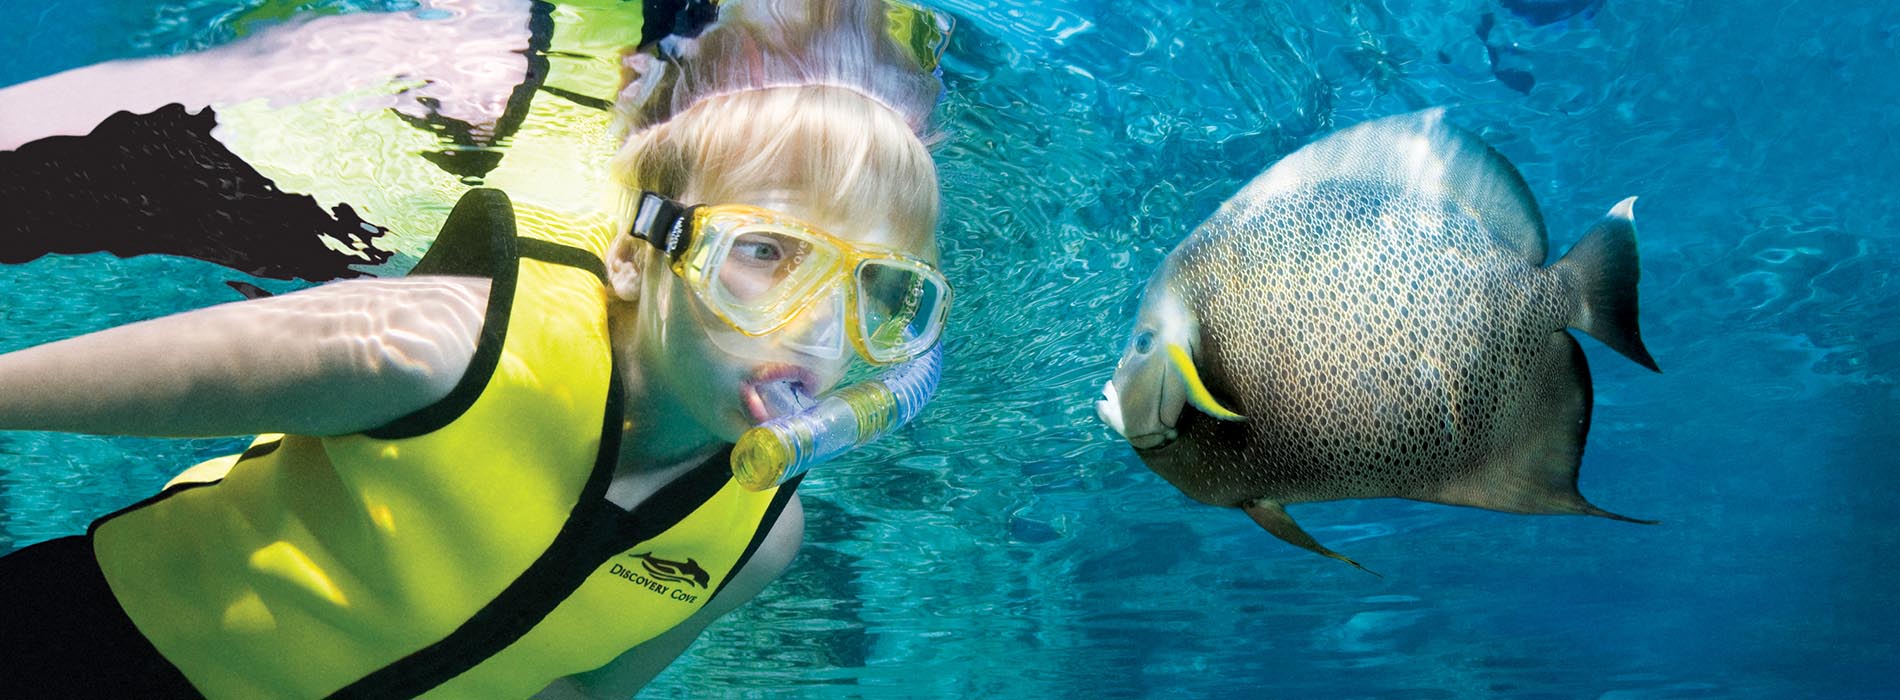 Boy snorkels with fish